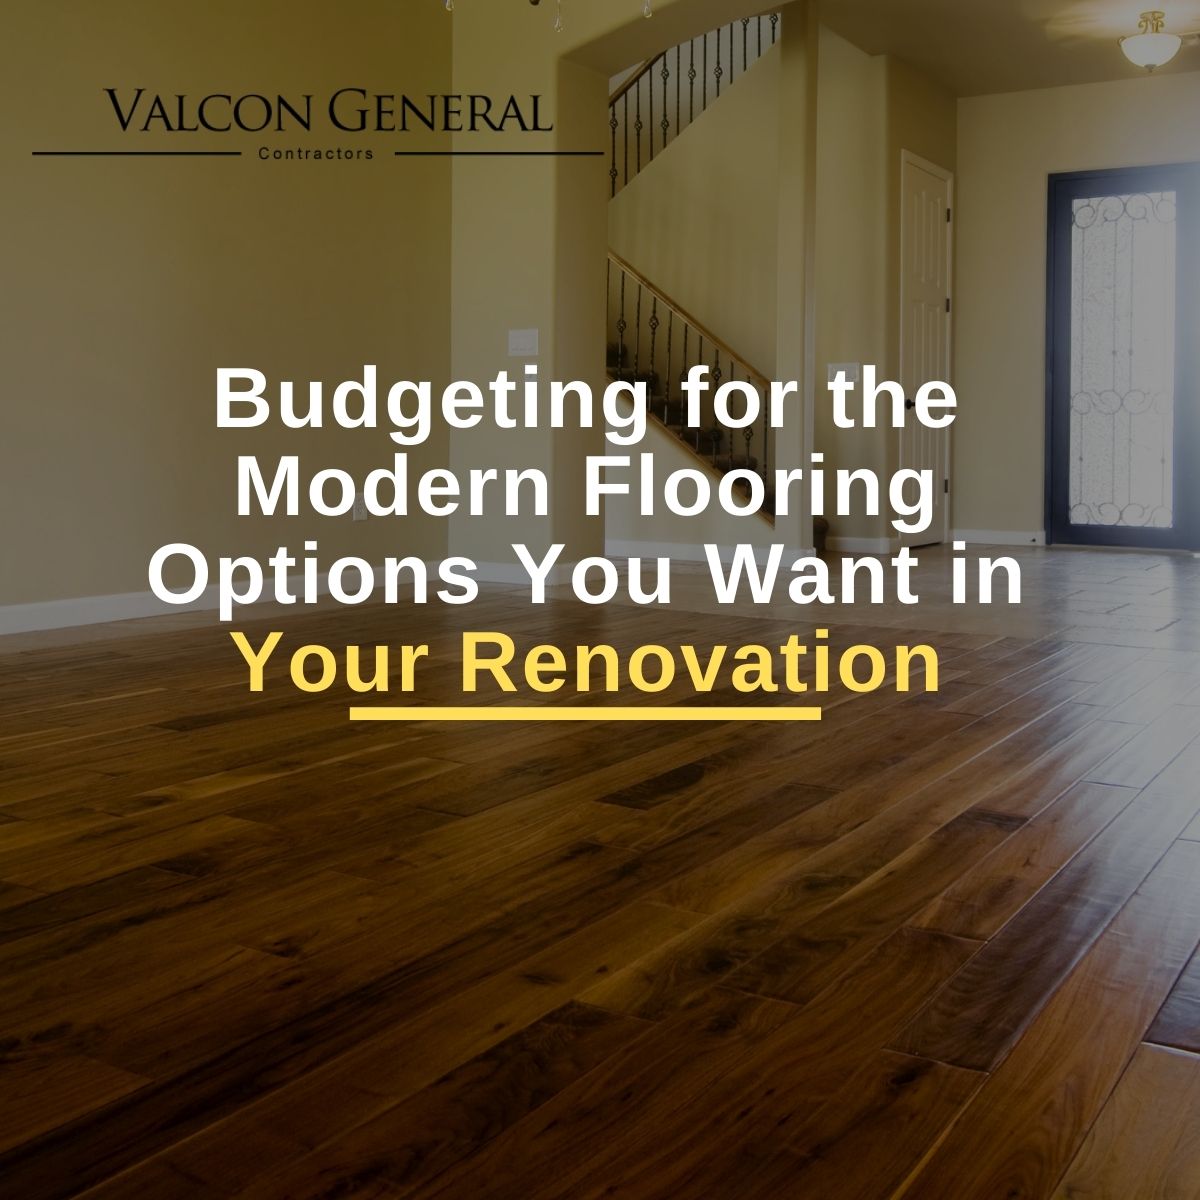 Budgeting For The Modern Flooring Options You Want in Your Renovation